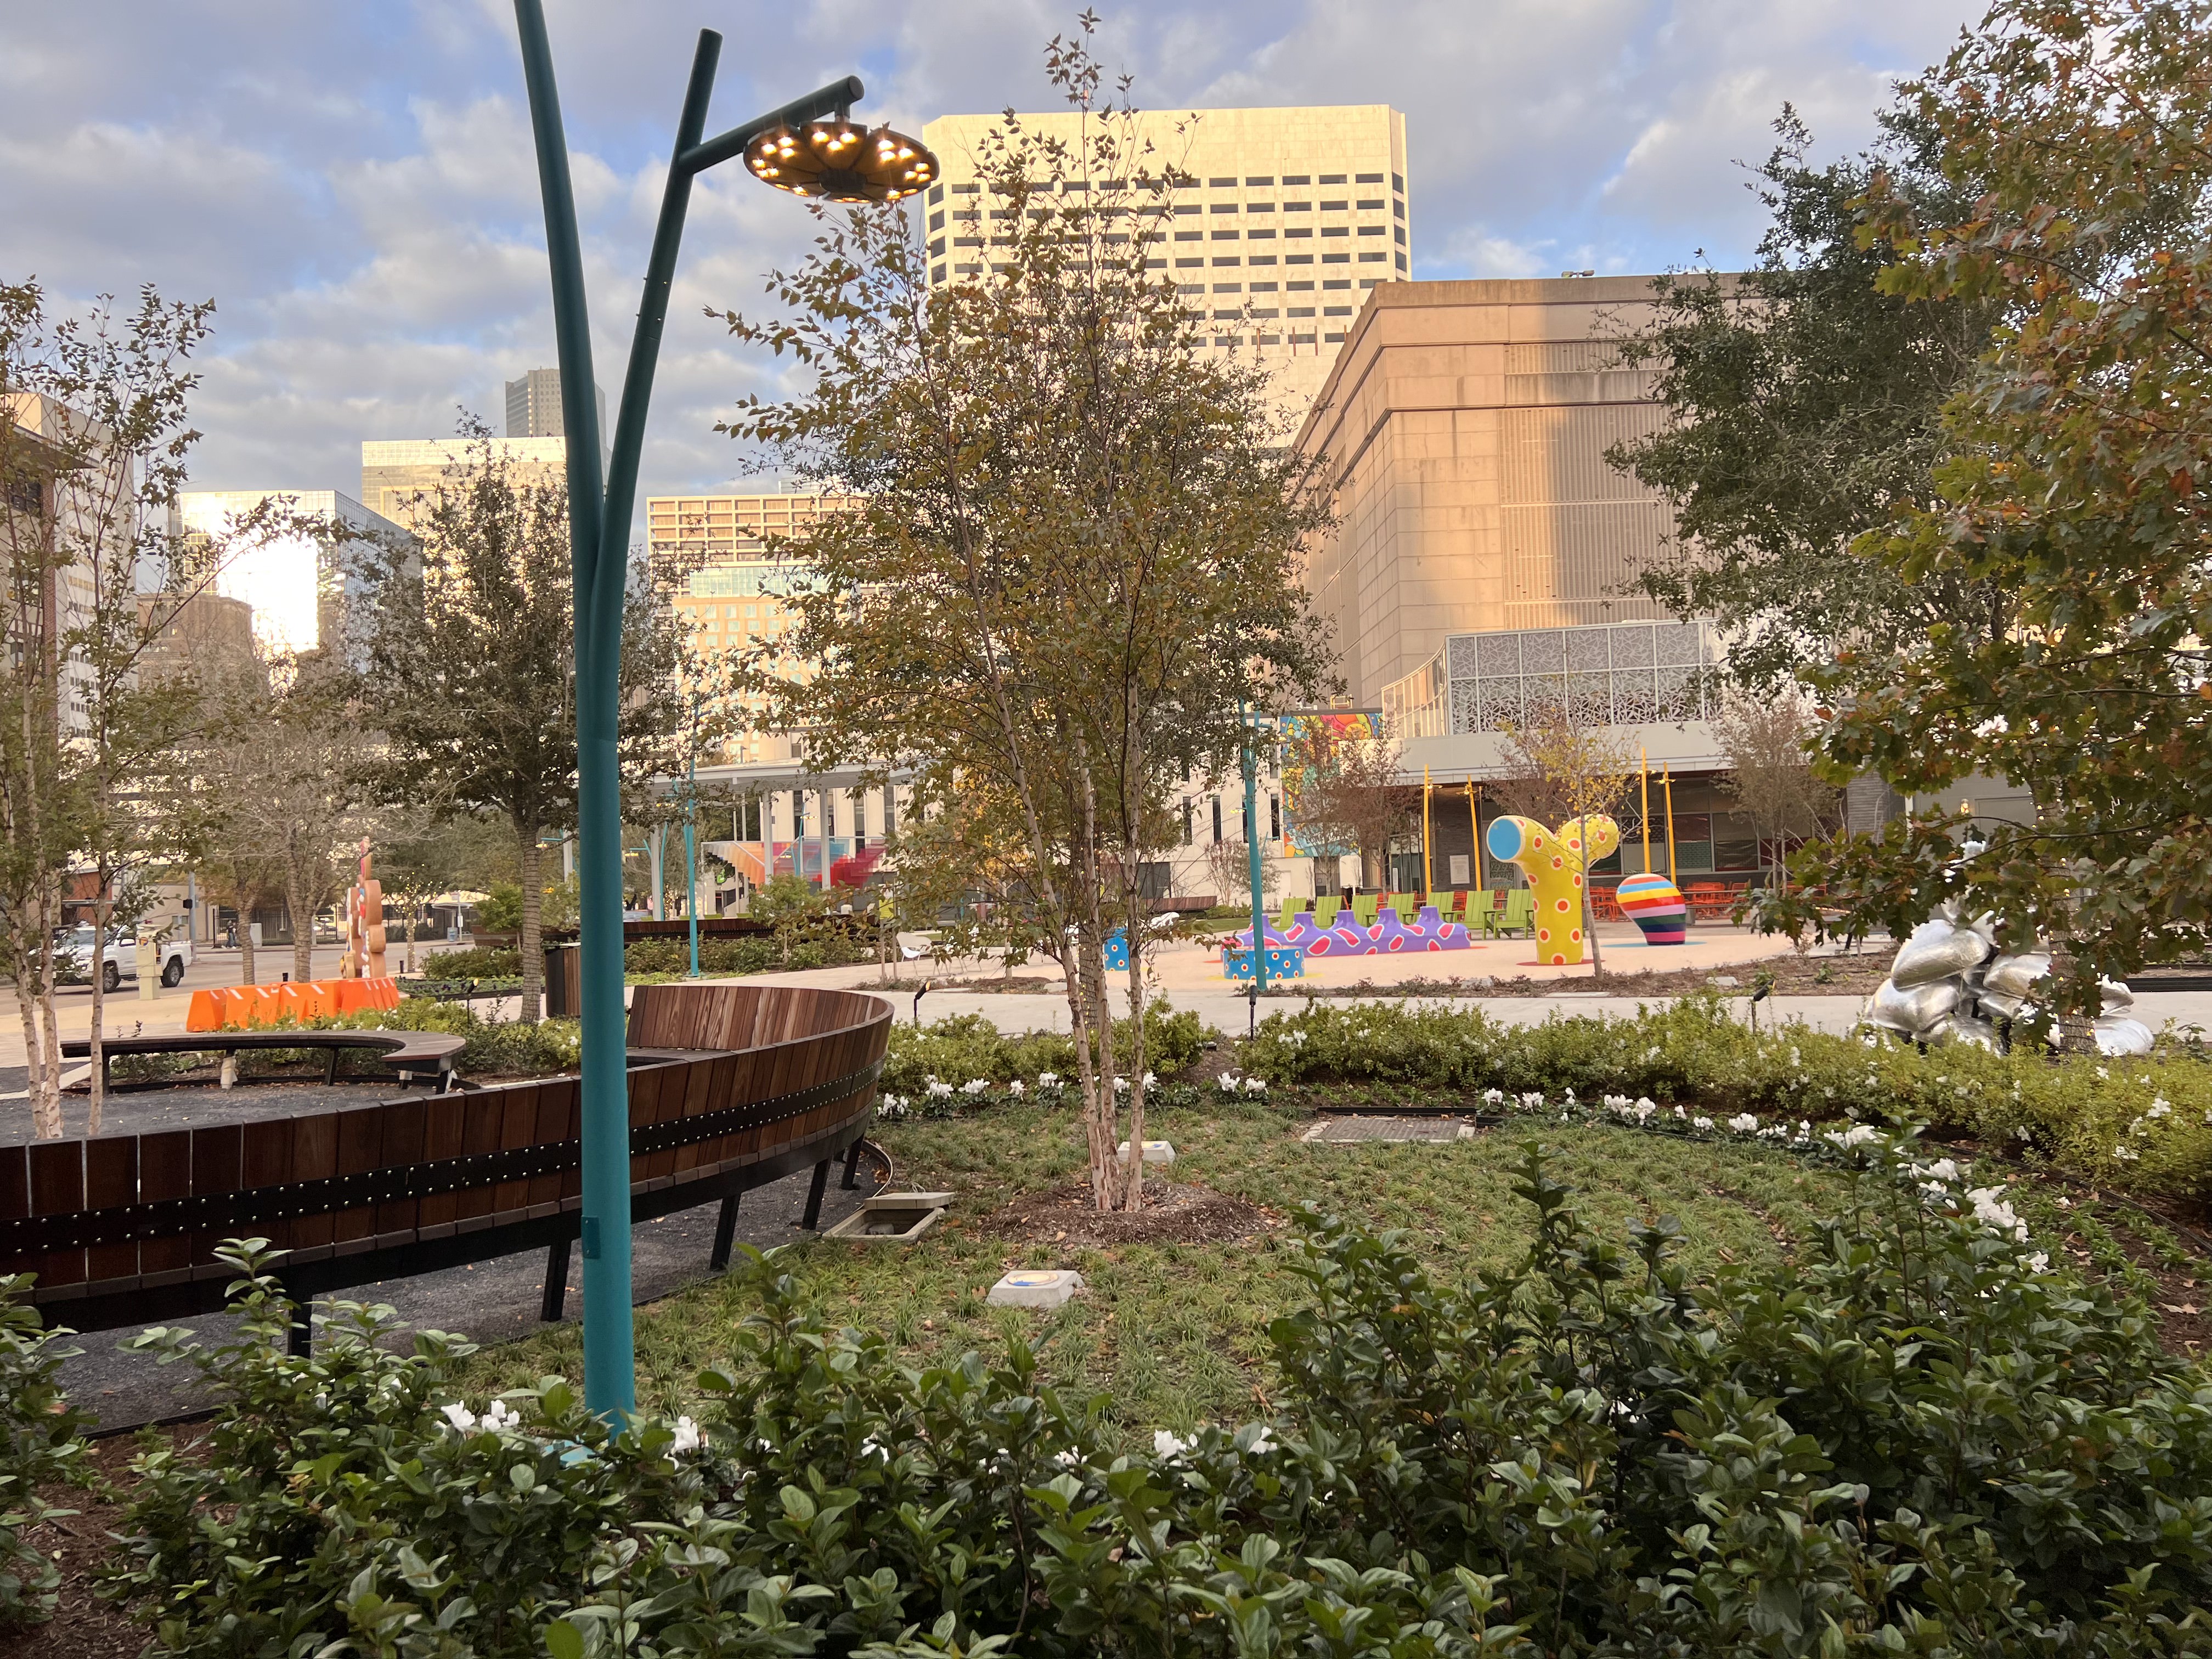 Picture of Trebly Park in Downtown Houston